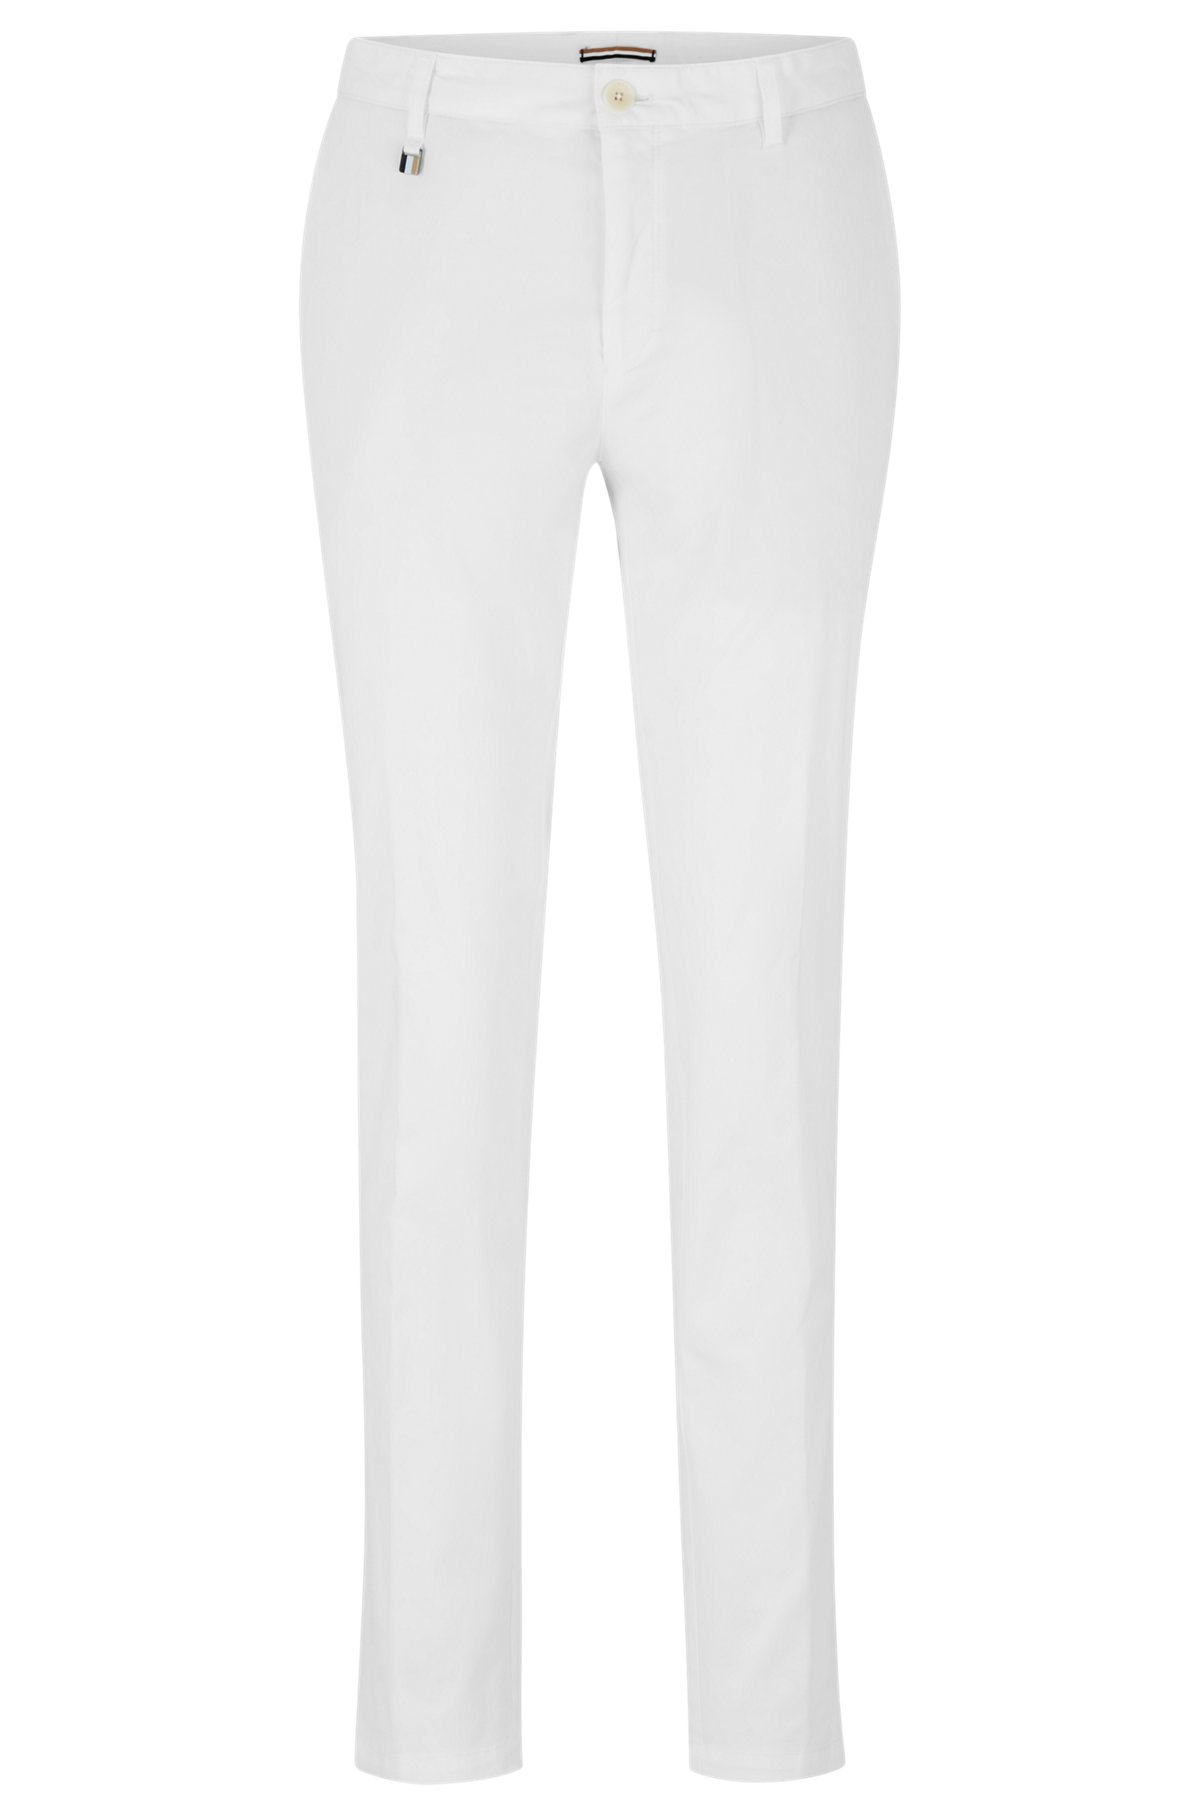 Slim-fit trousers in stretch cotton with signature stripe, White